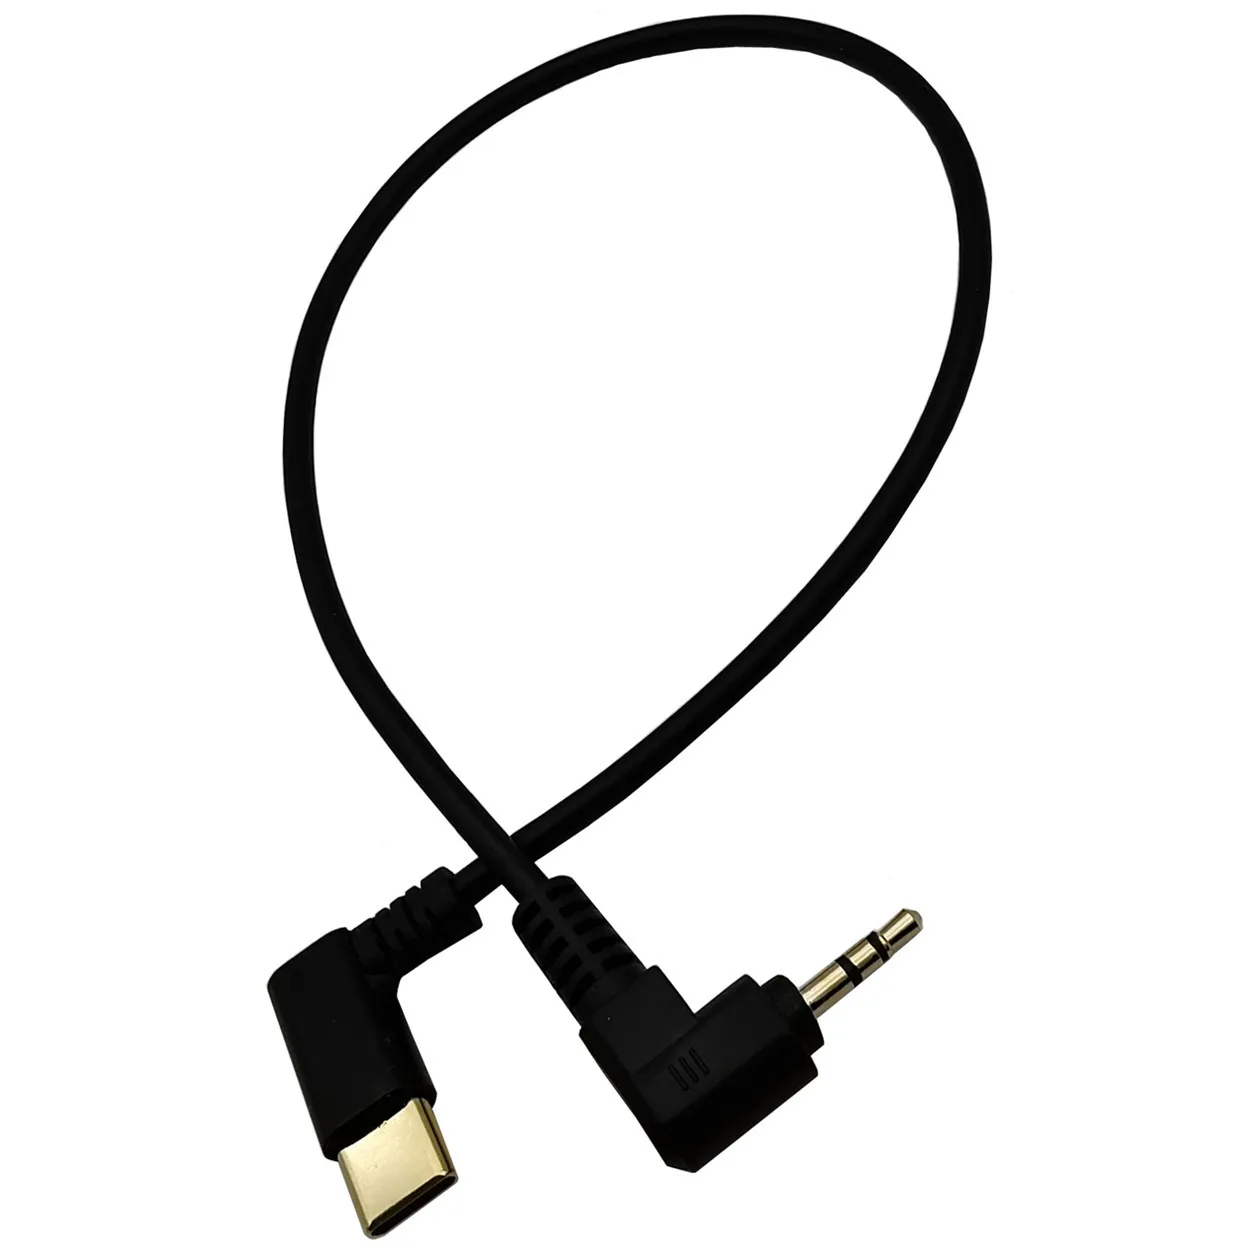 2.5mm Audio to USB C Cable, 90 Degree angle USB Type-C to 2.5 mm elbow Male AUX Headphone Jack 30cm cable